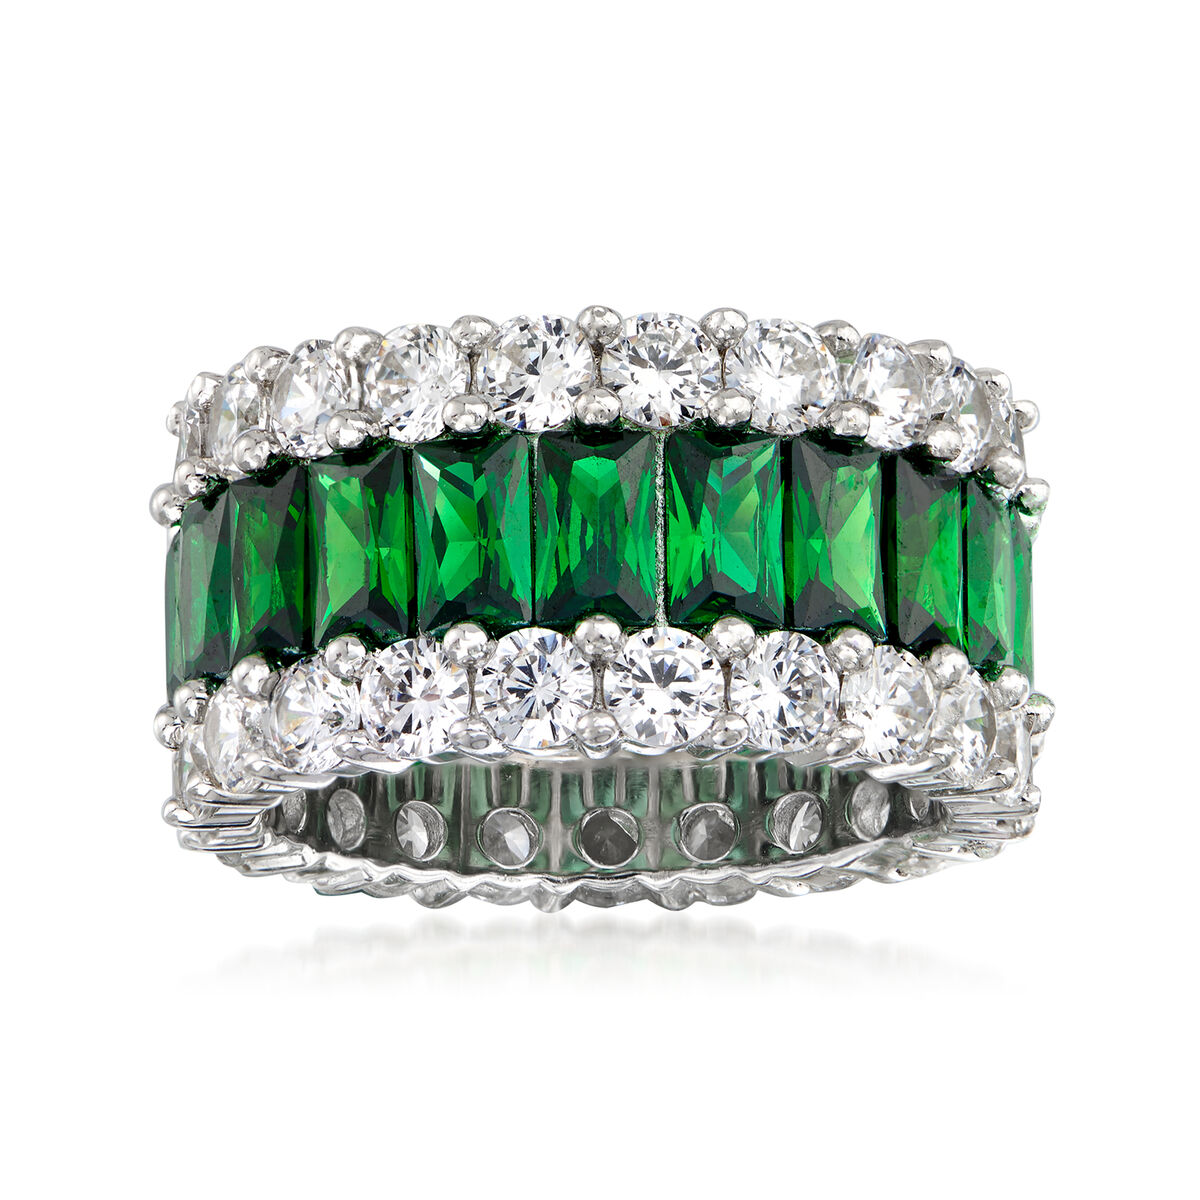 6.75 ct. t.w. Simulated Emerald and 4.40 ct. t.w. CZ Eternity Band in ...